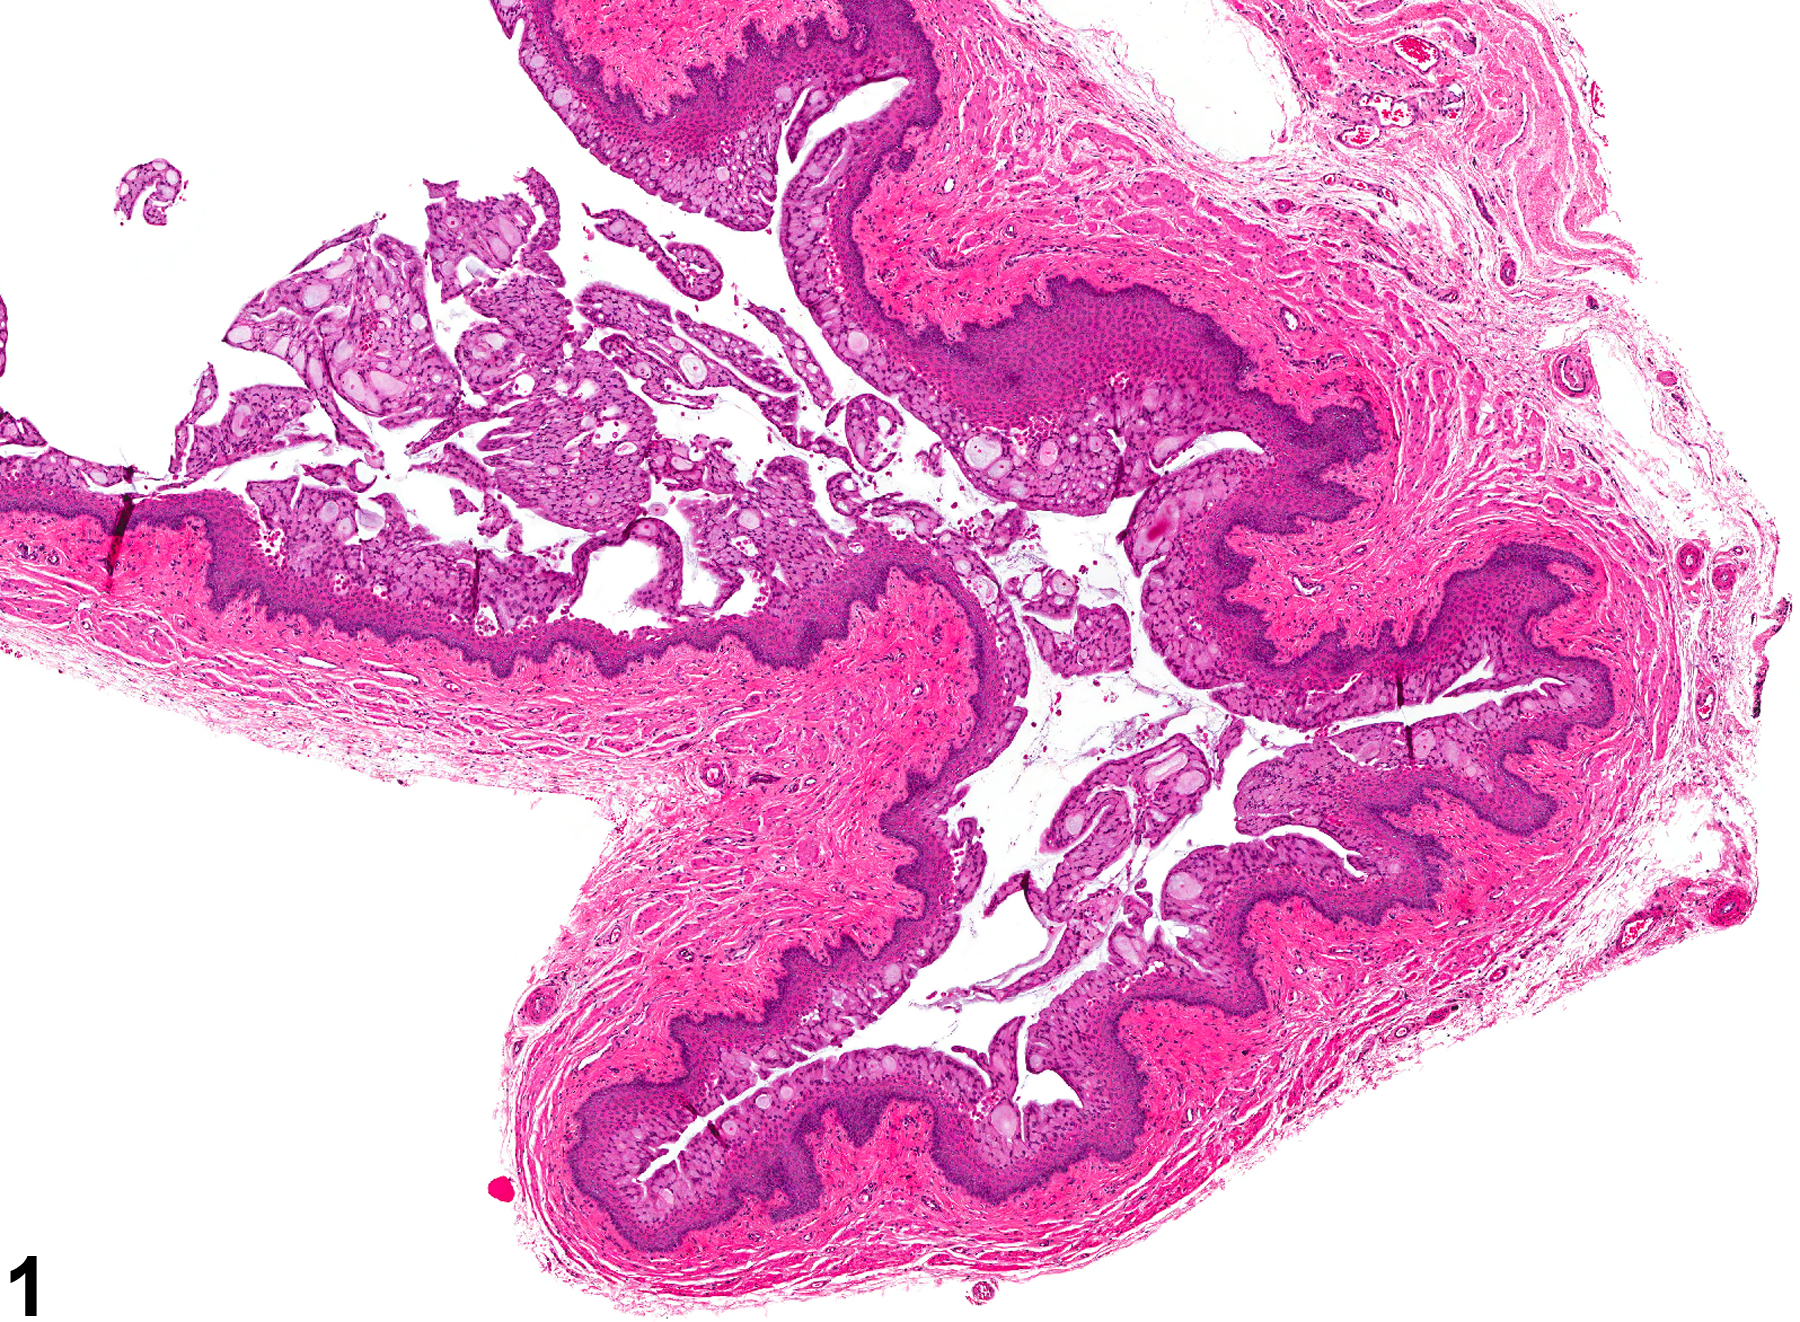 Image of mucification in the vagina from a female Harlan Sprague-Dawley rat in a chronic study